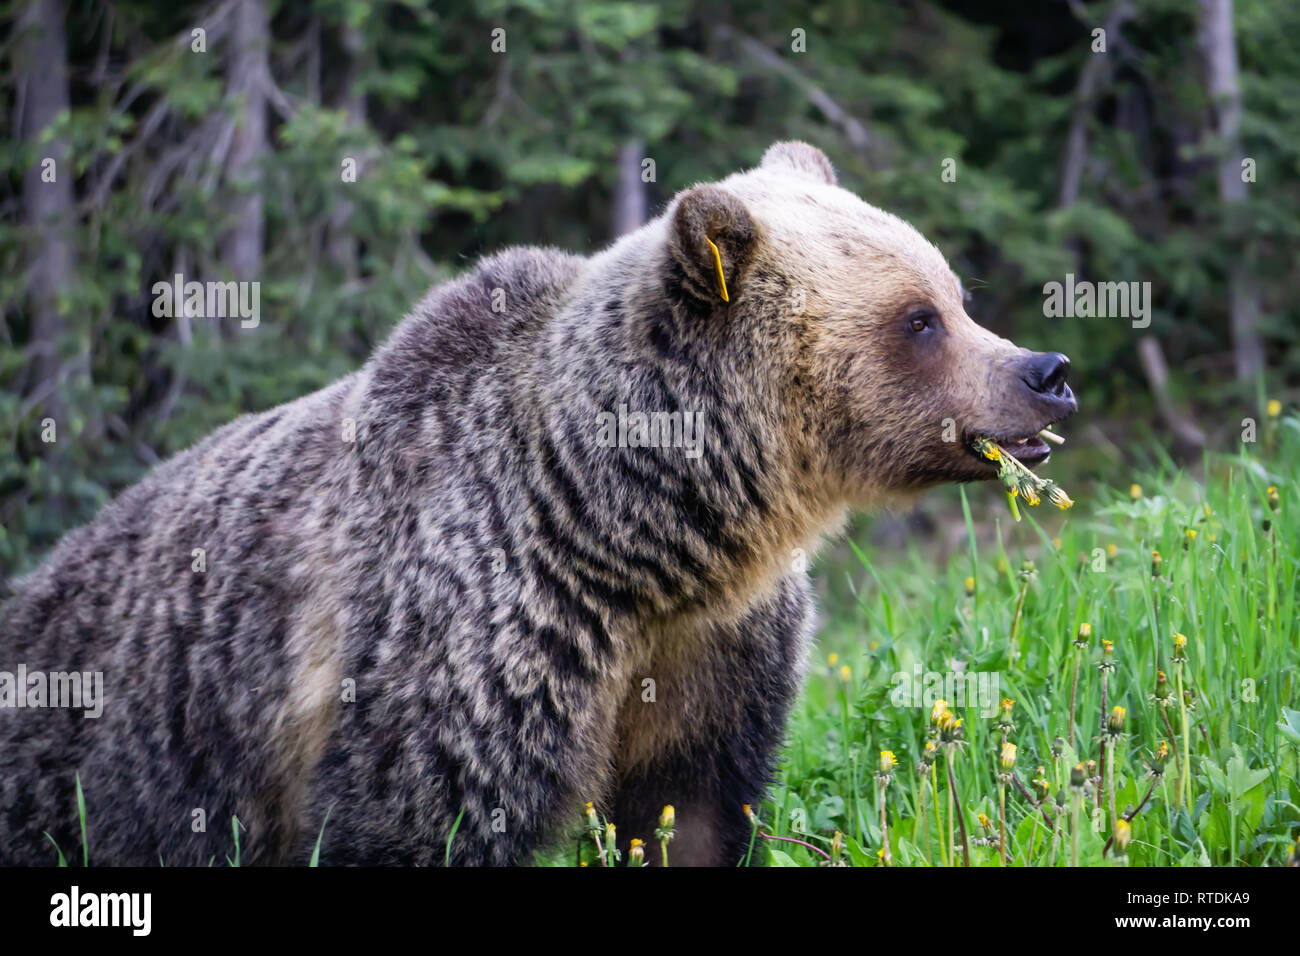 Mother Grizzly Bear is eating weeds and grass in the nature. Taken in Banff National Park, Alberta, Canada. Stock Photo